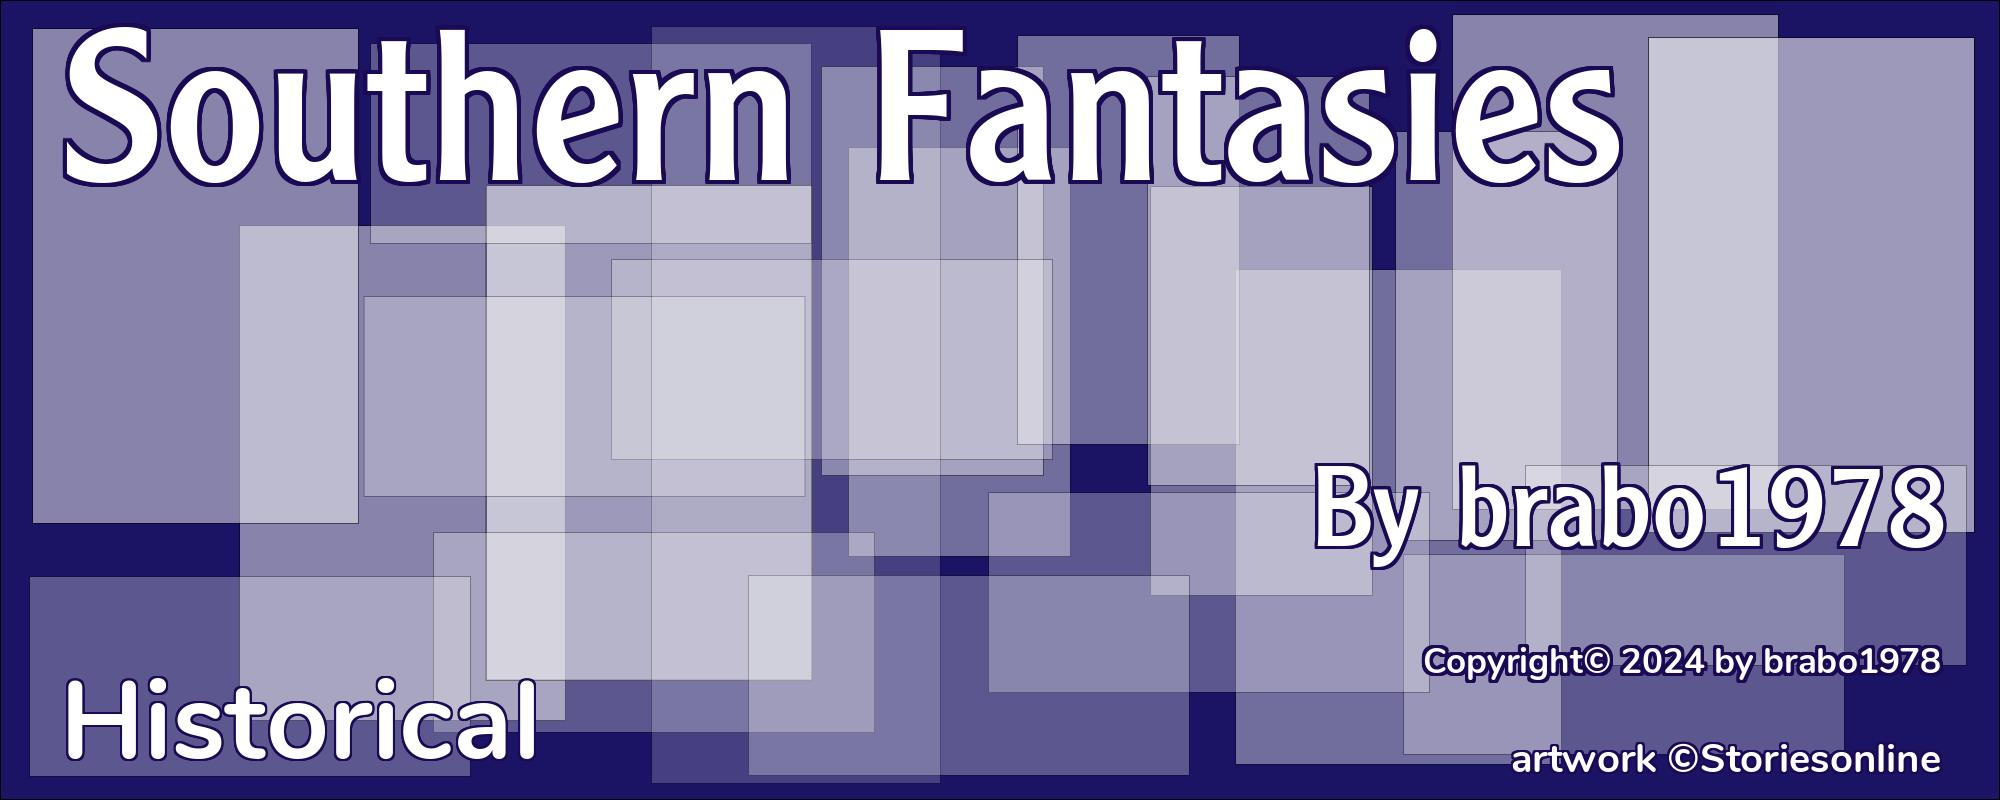 Southern Fantasies - Cover